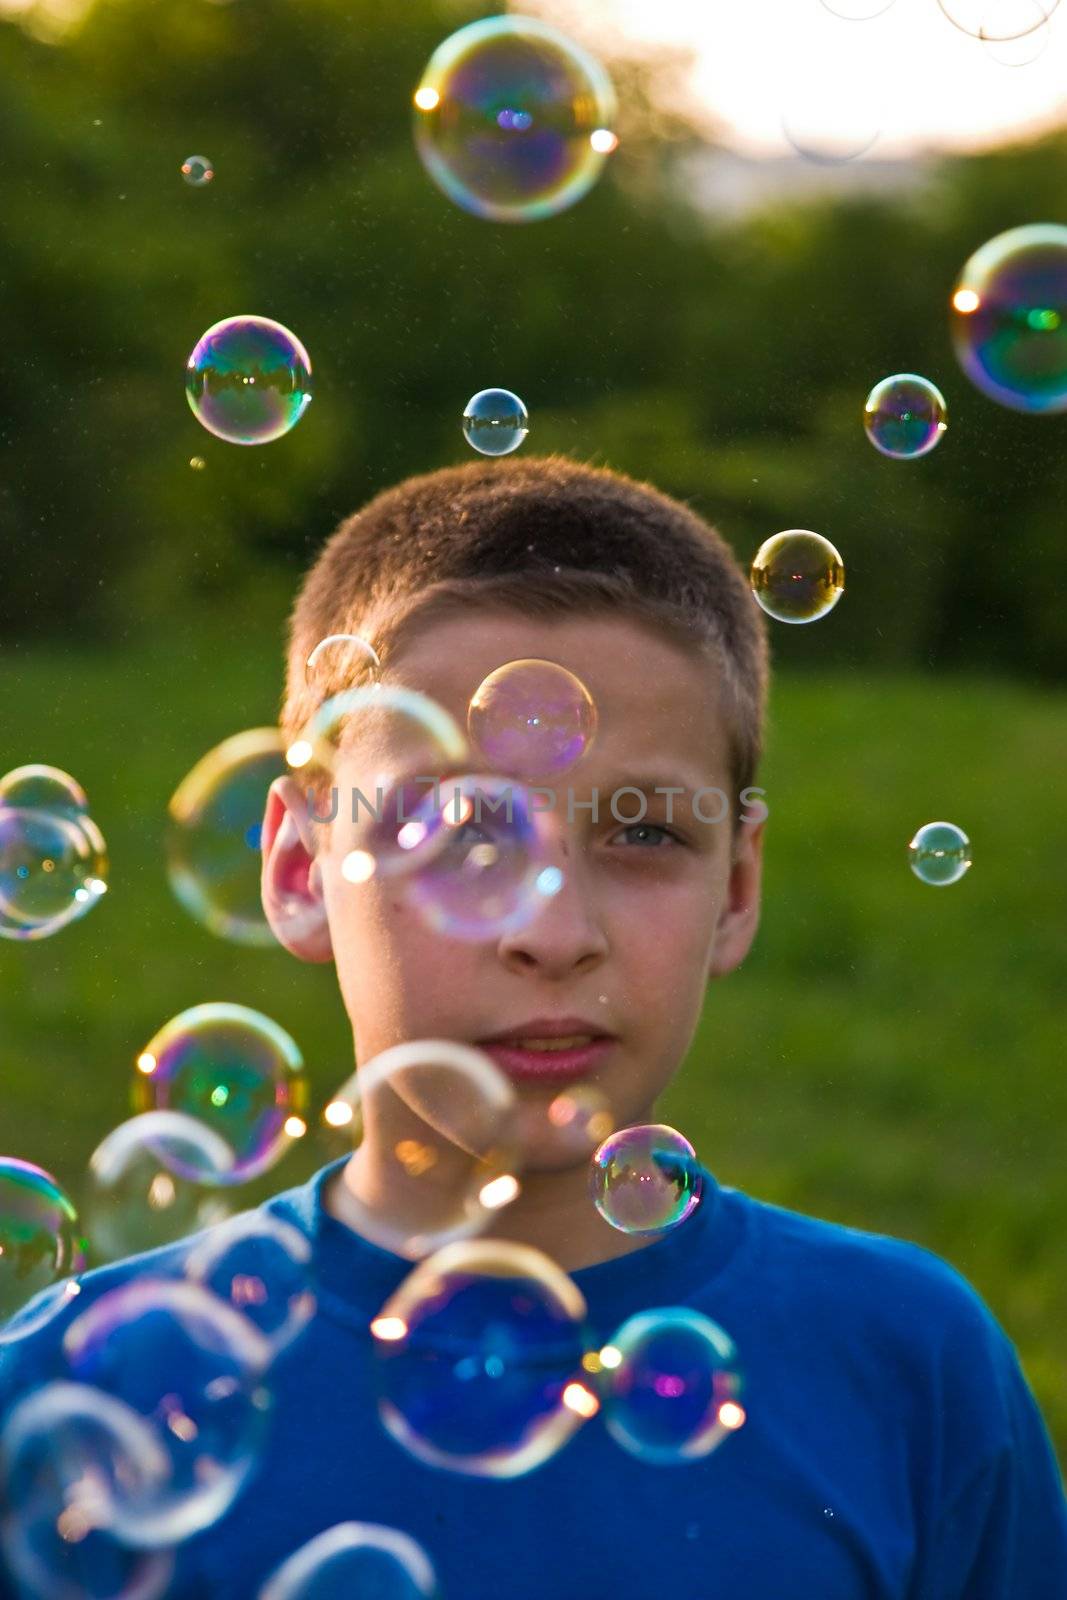 children series: boy play with soap bubbles